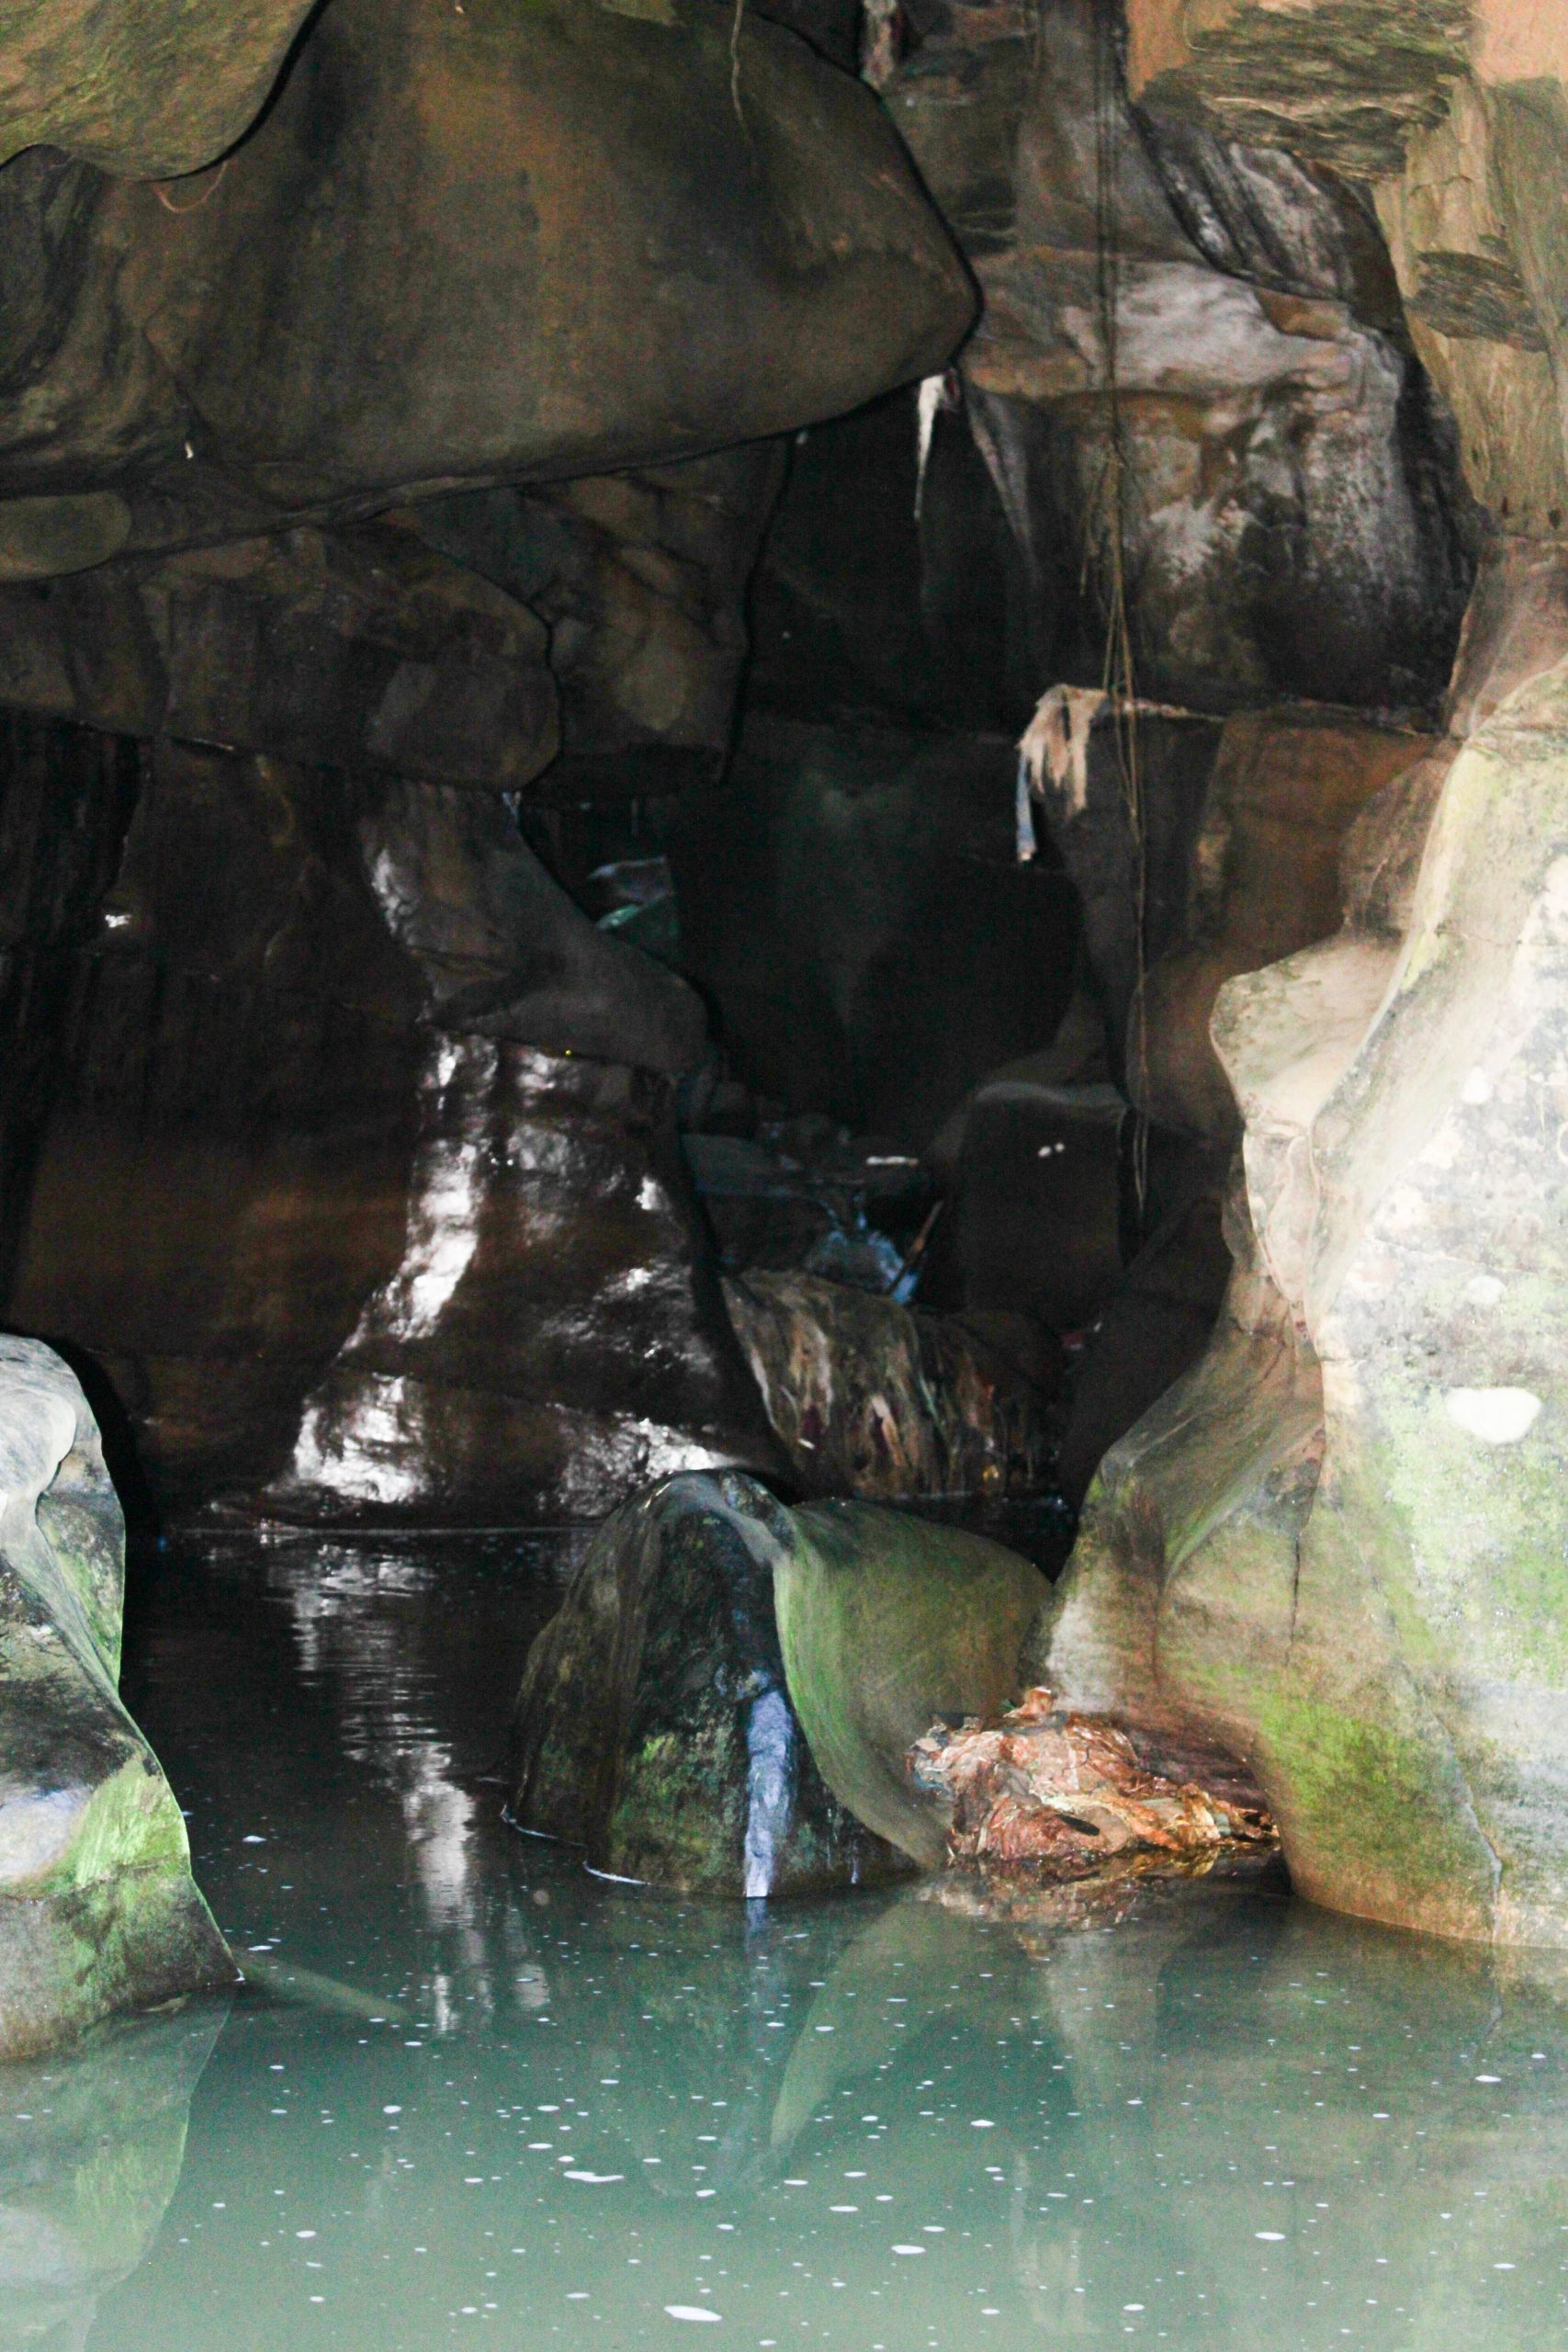 Water flowing through the cave